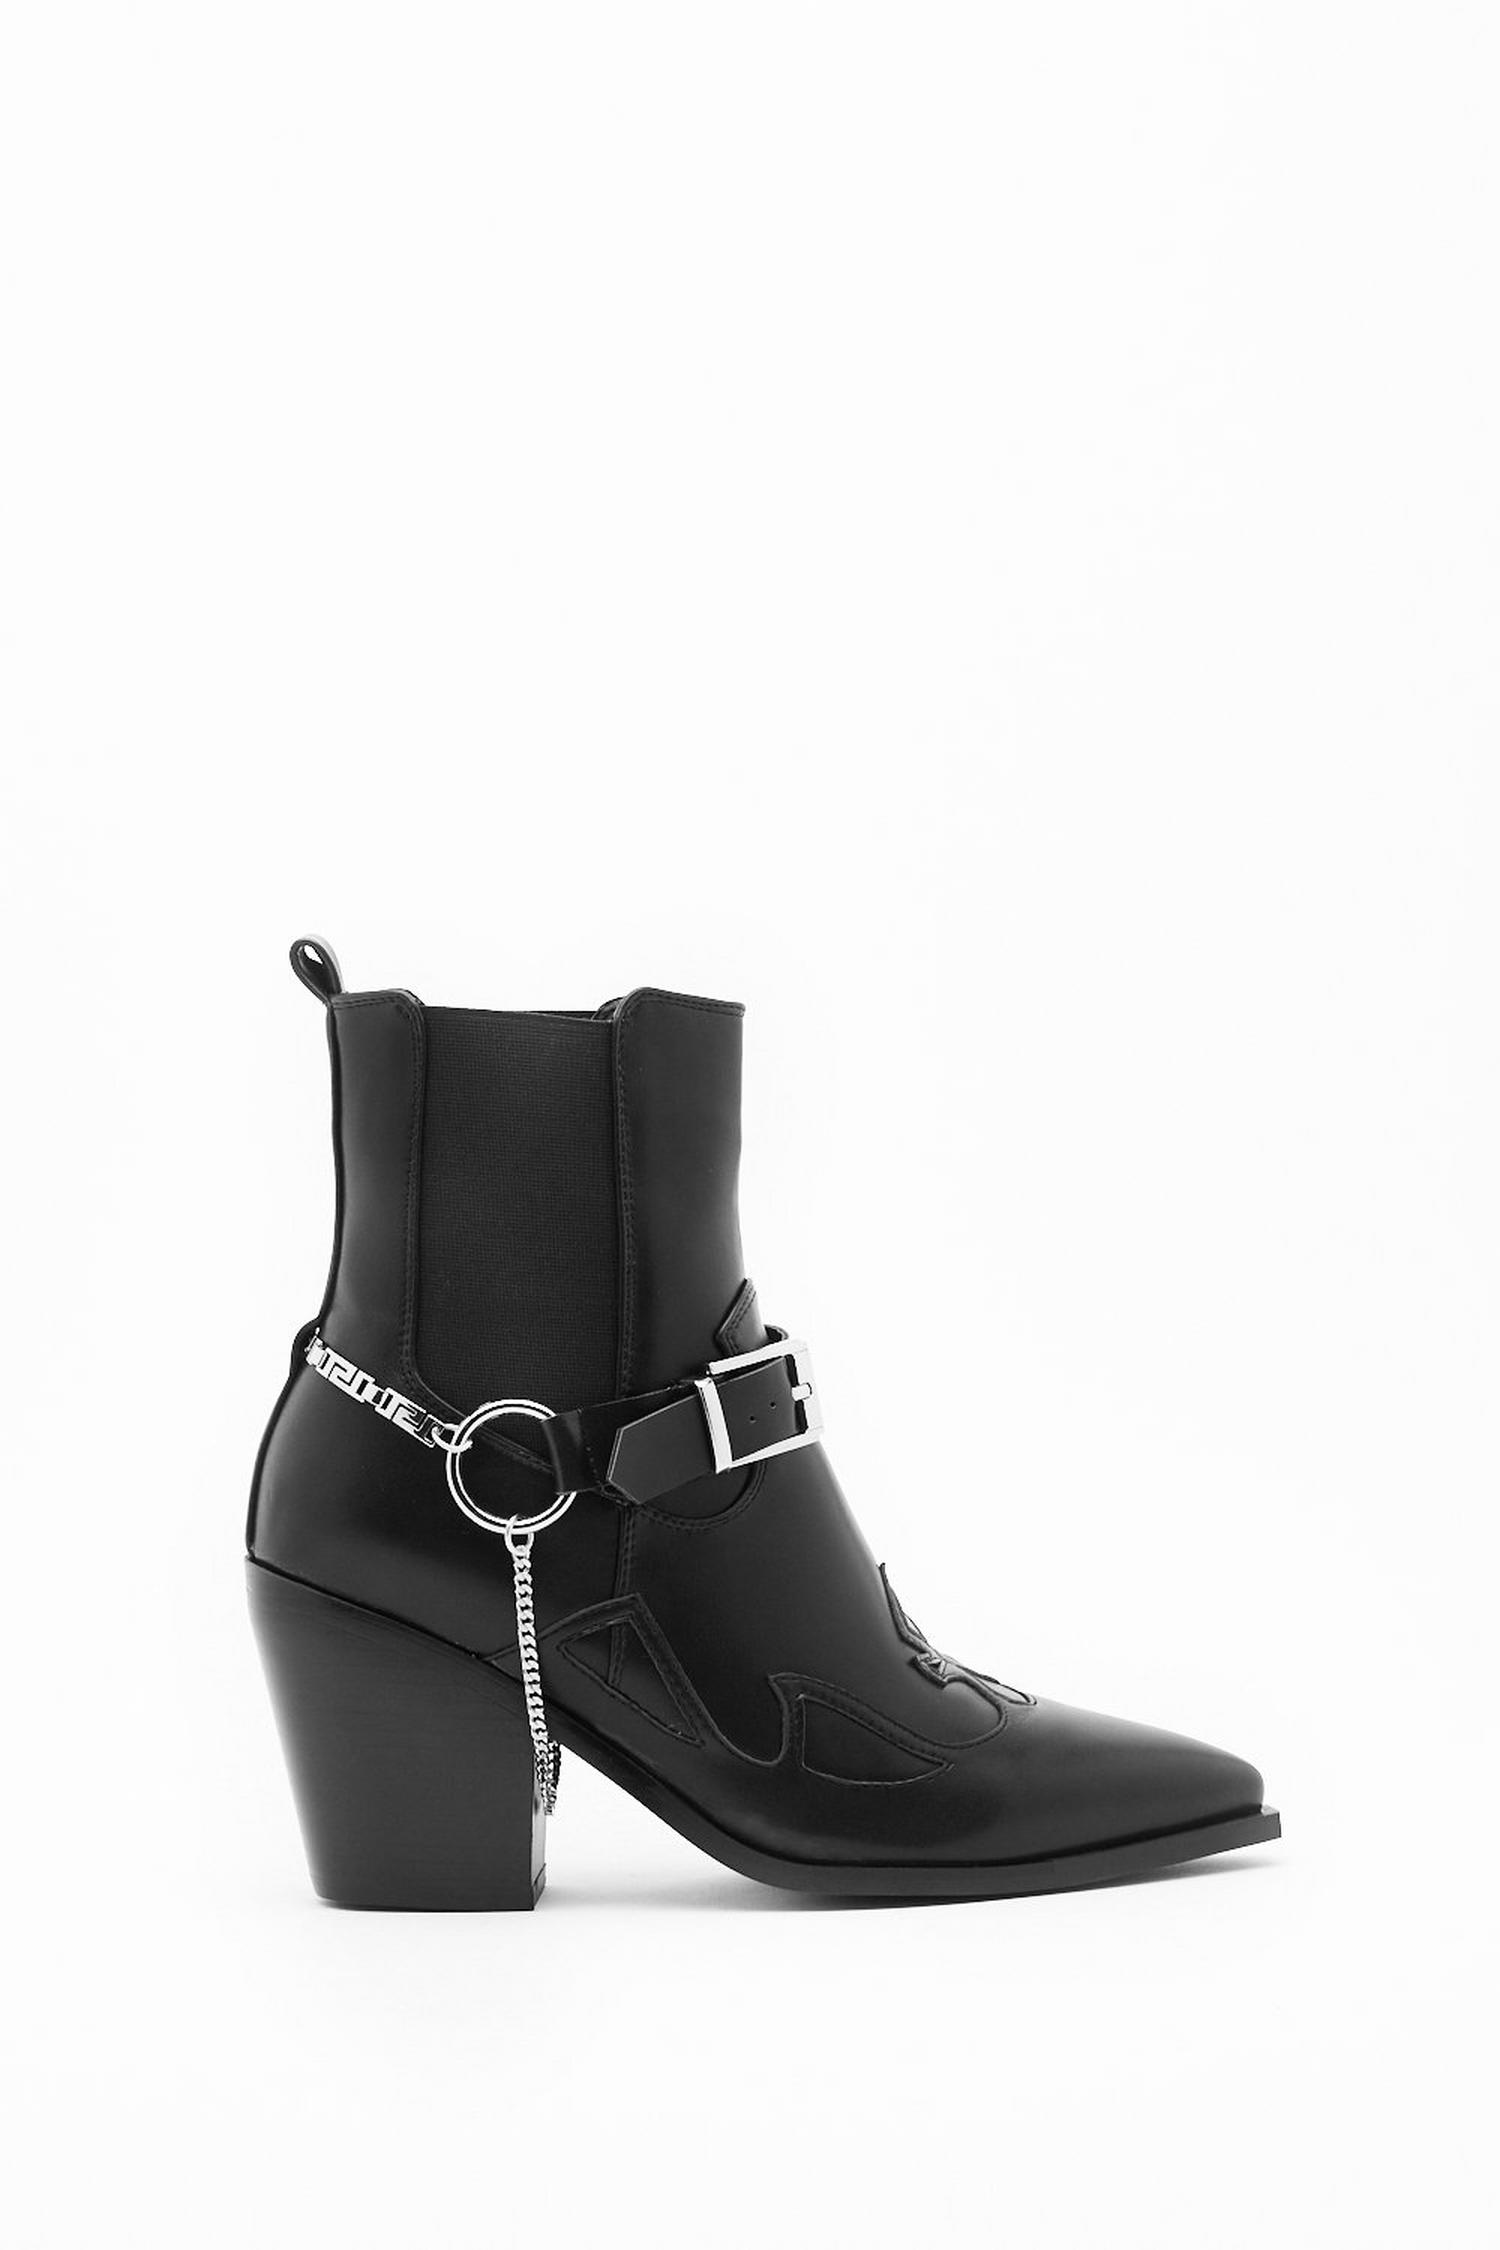 Stirrup and At 'Em Western Boots | Nasty Gal